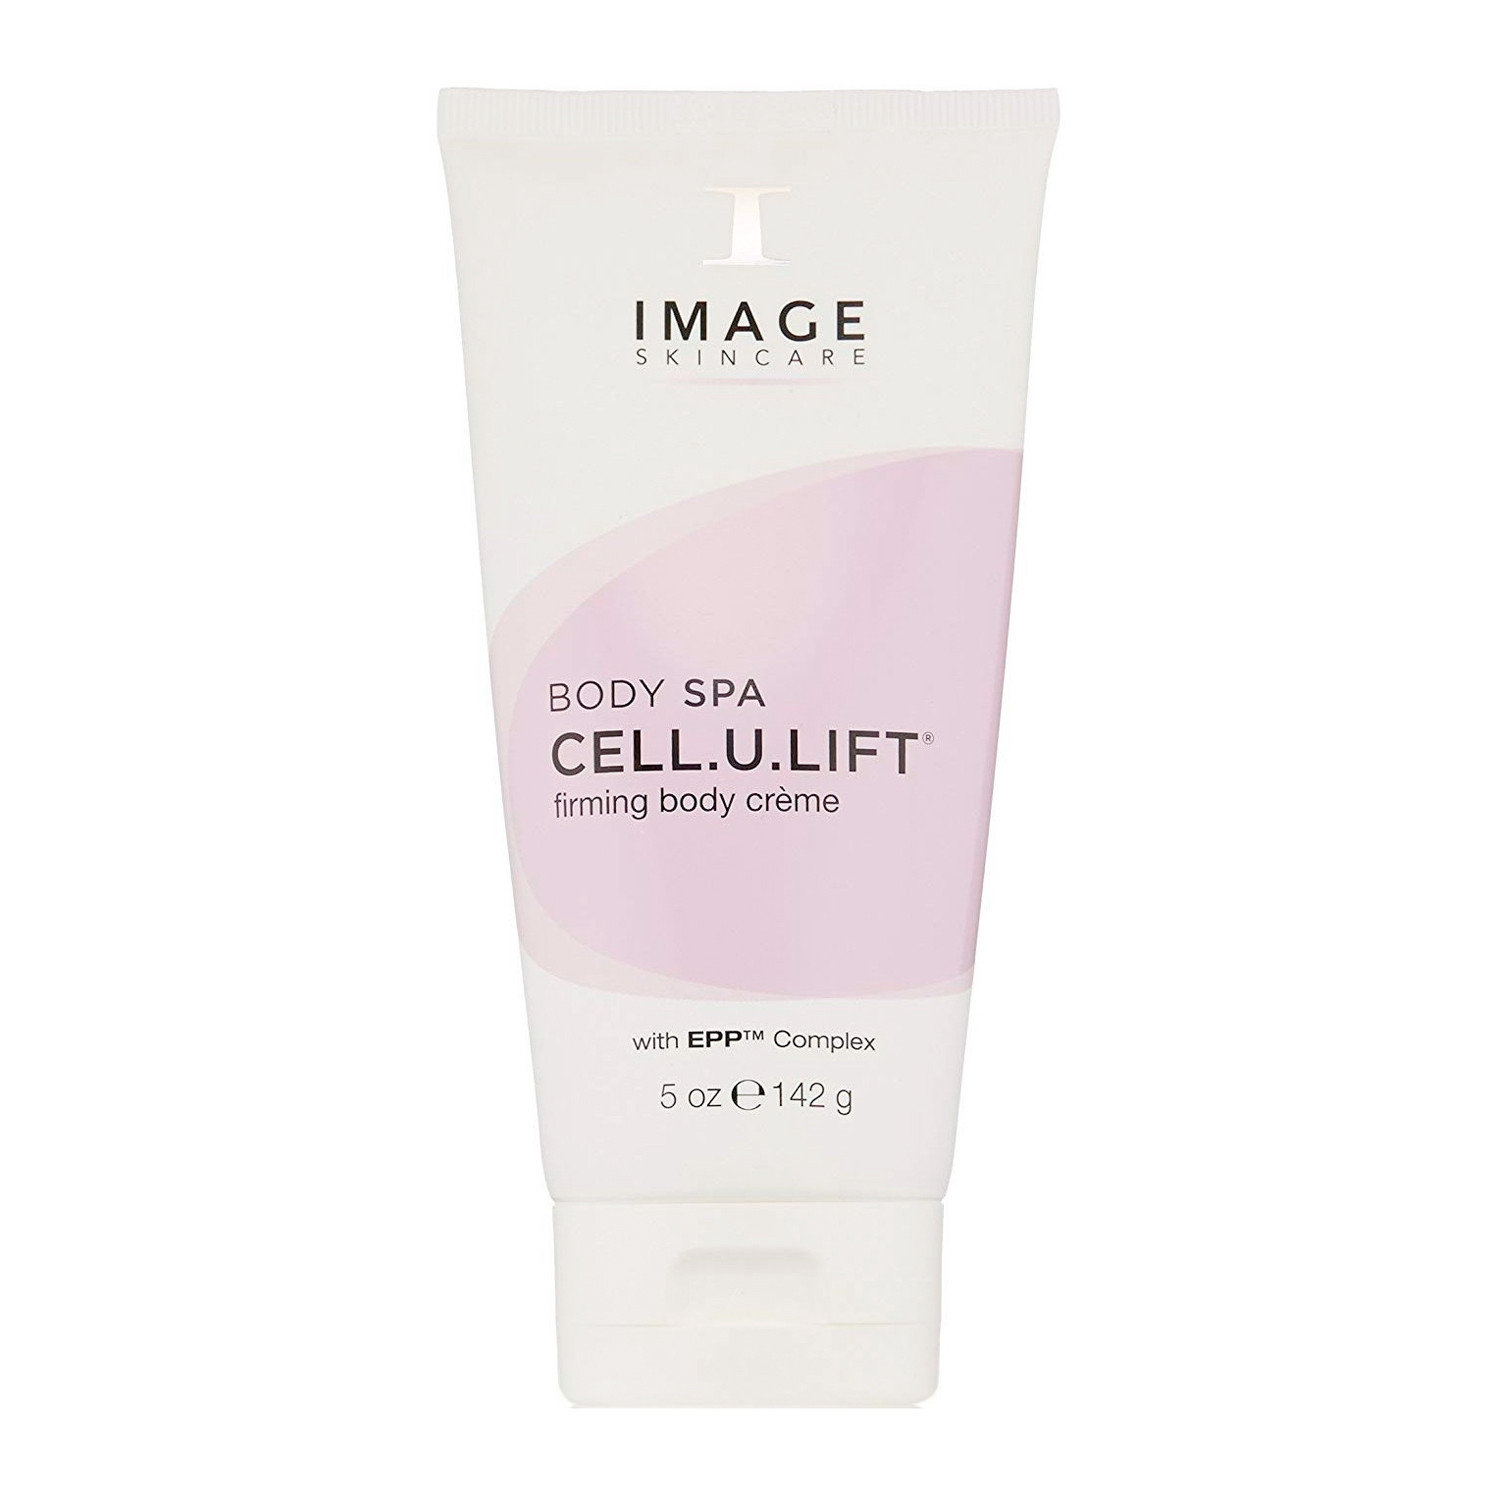 image skincare body spa cell.u.lift body firming creme